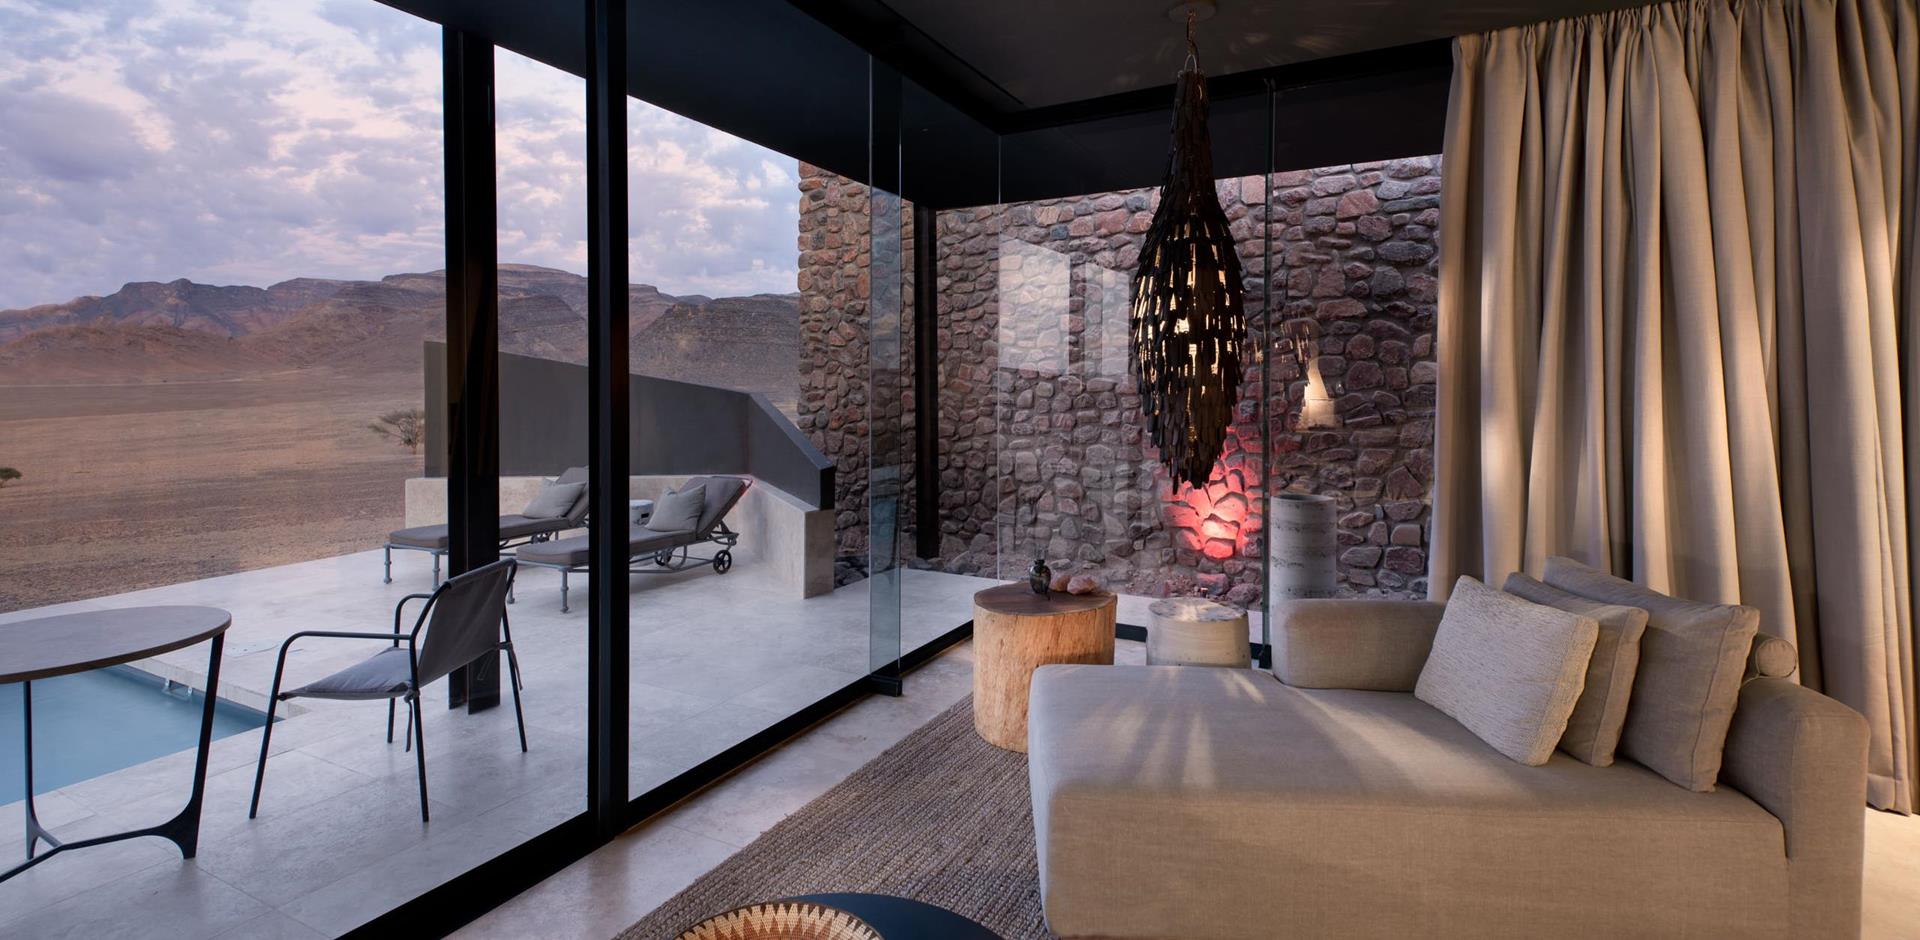 Guest-suite-andBeyond-Sossusvlei, Namibia, A&K